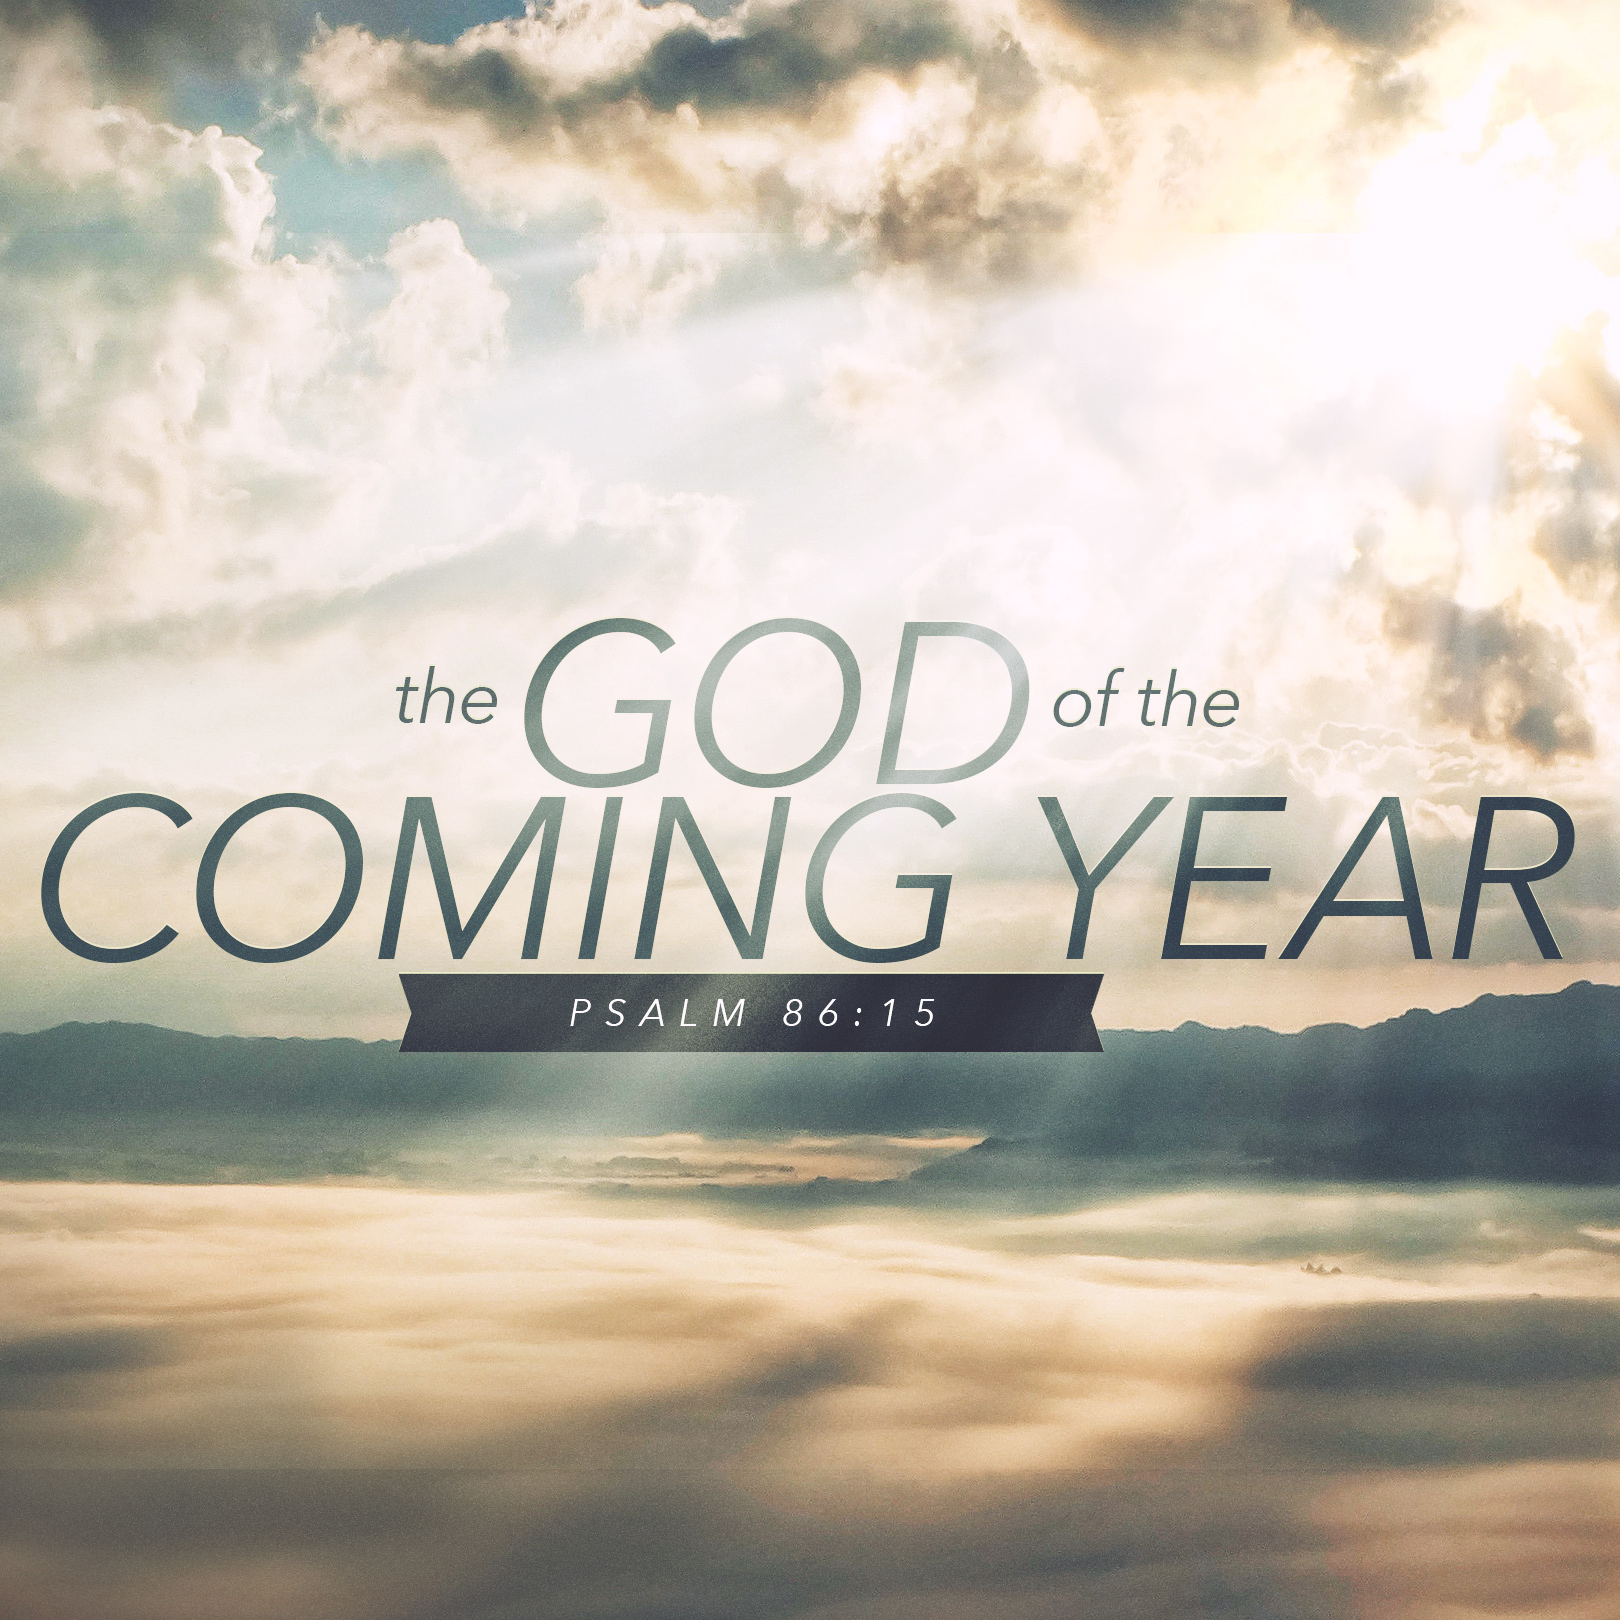 The God of the Coming Year